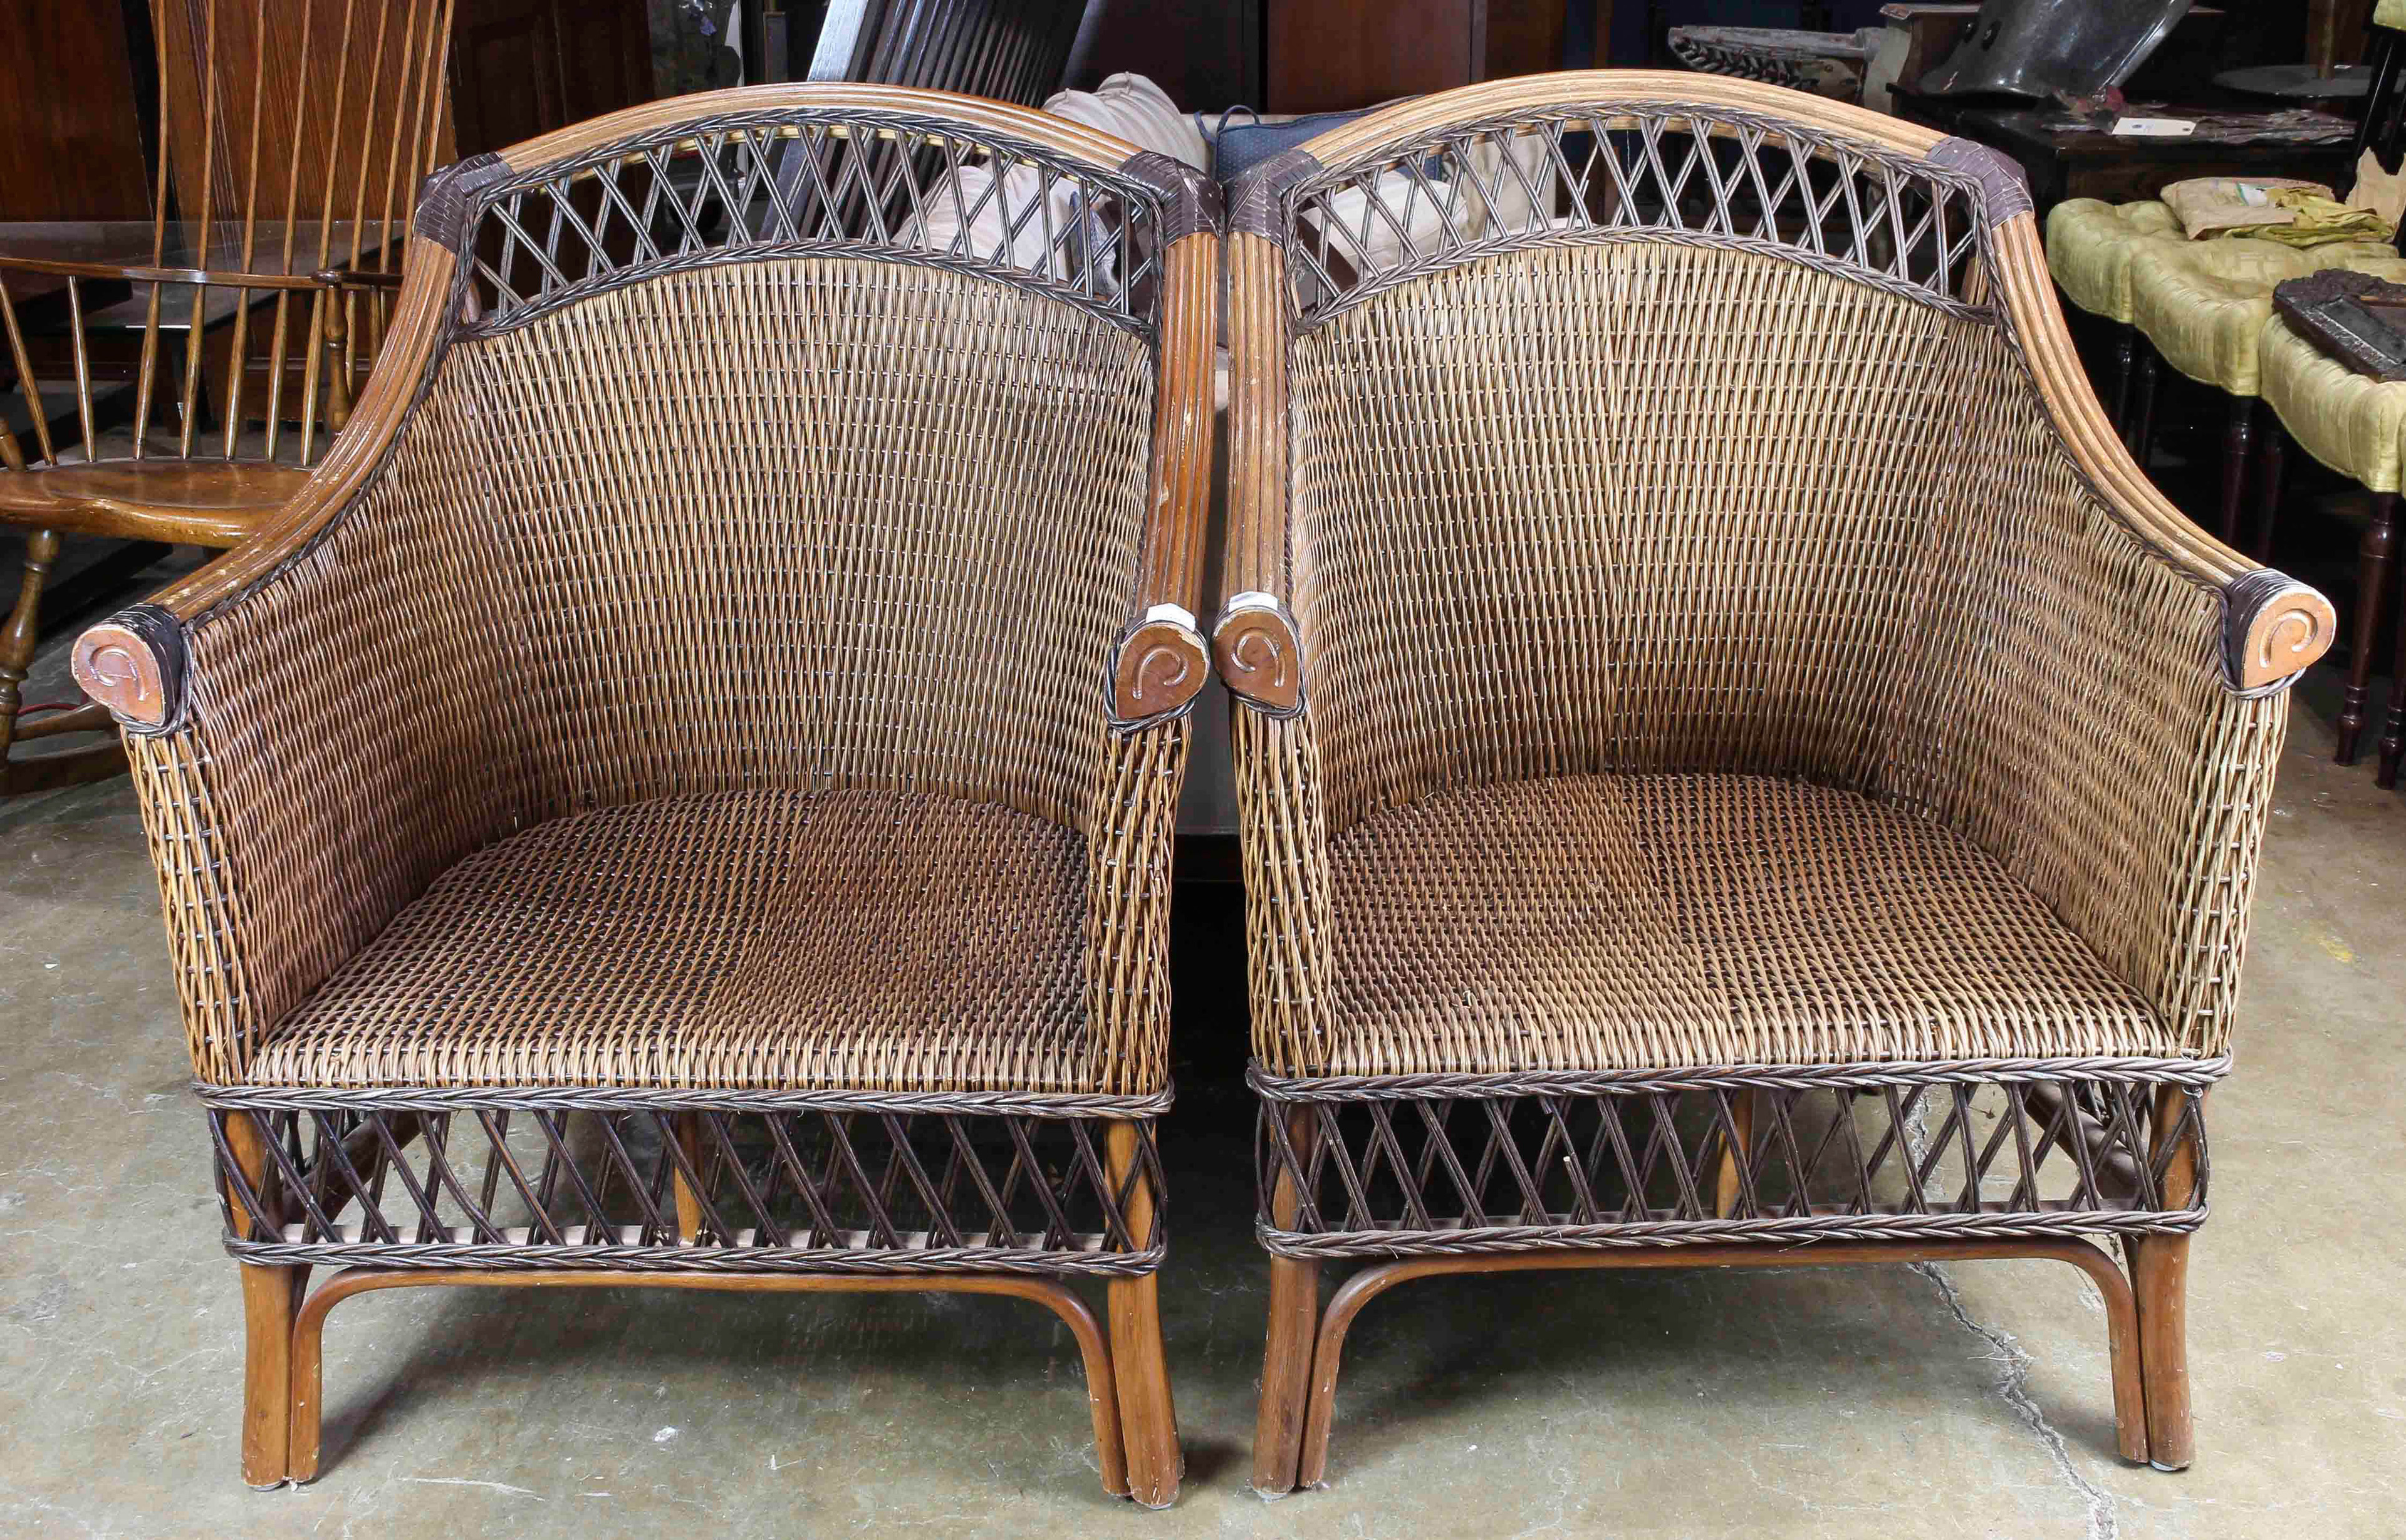 A PAIR OF WICKER ARM CHAIRS A pair